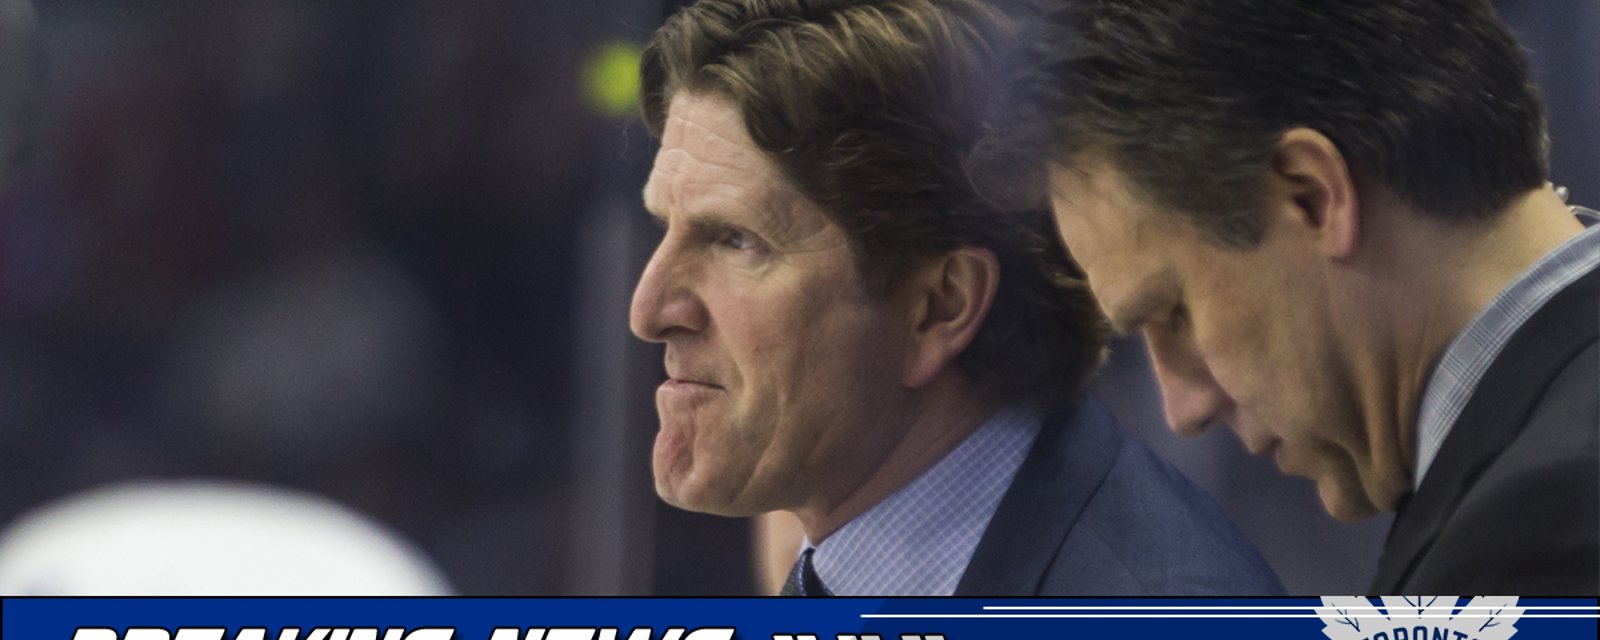 BREAKING: Mike Babcock had HARSH comments on Auston Matthews following Leafs elimination.